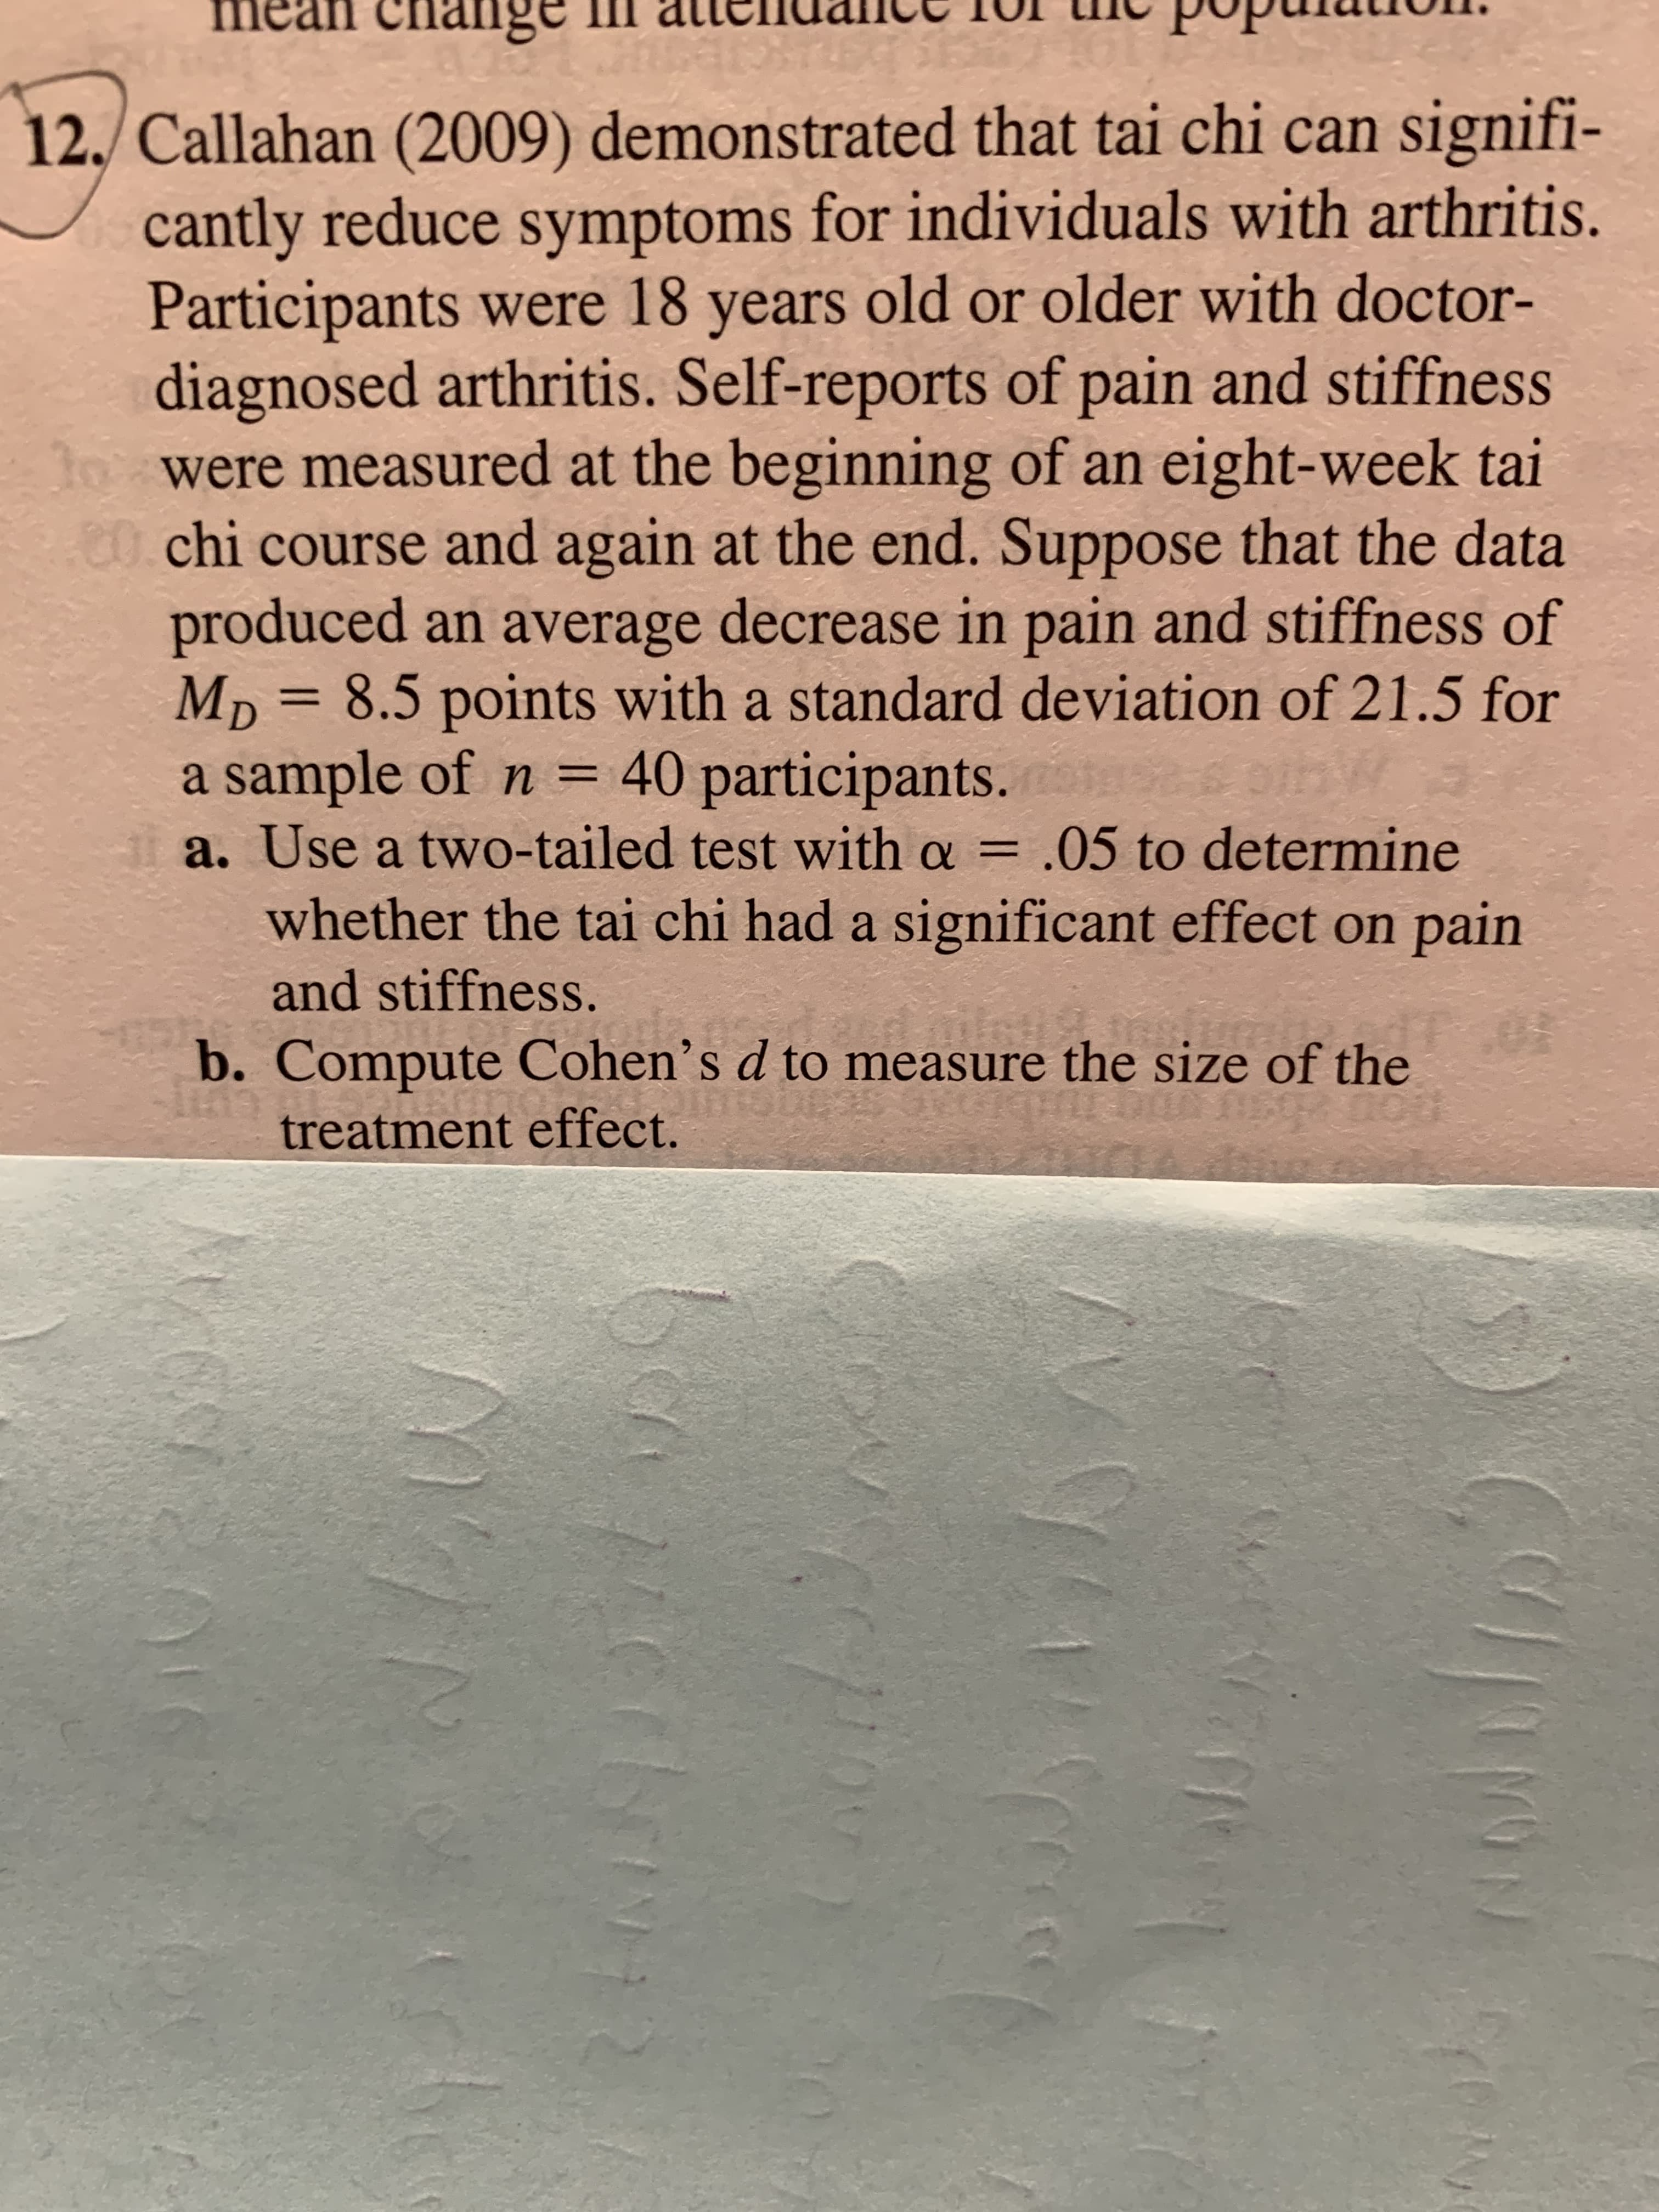 a. Use a two-tailed test with a = .05 to determine
%3D
whether the tai chi had a significant effect on pain
and stiffness.
b. Compute Cohen’s d to measure the size of the
treatment effect.
